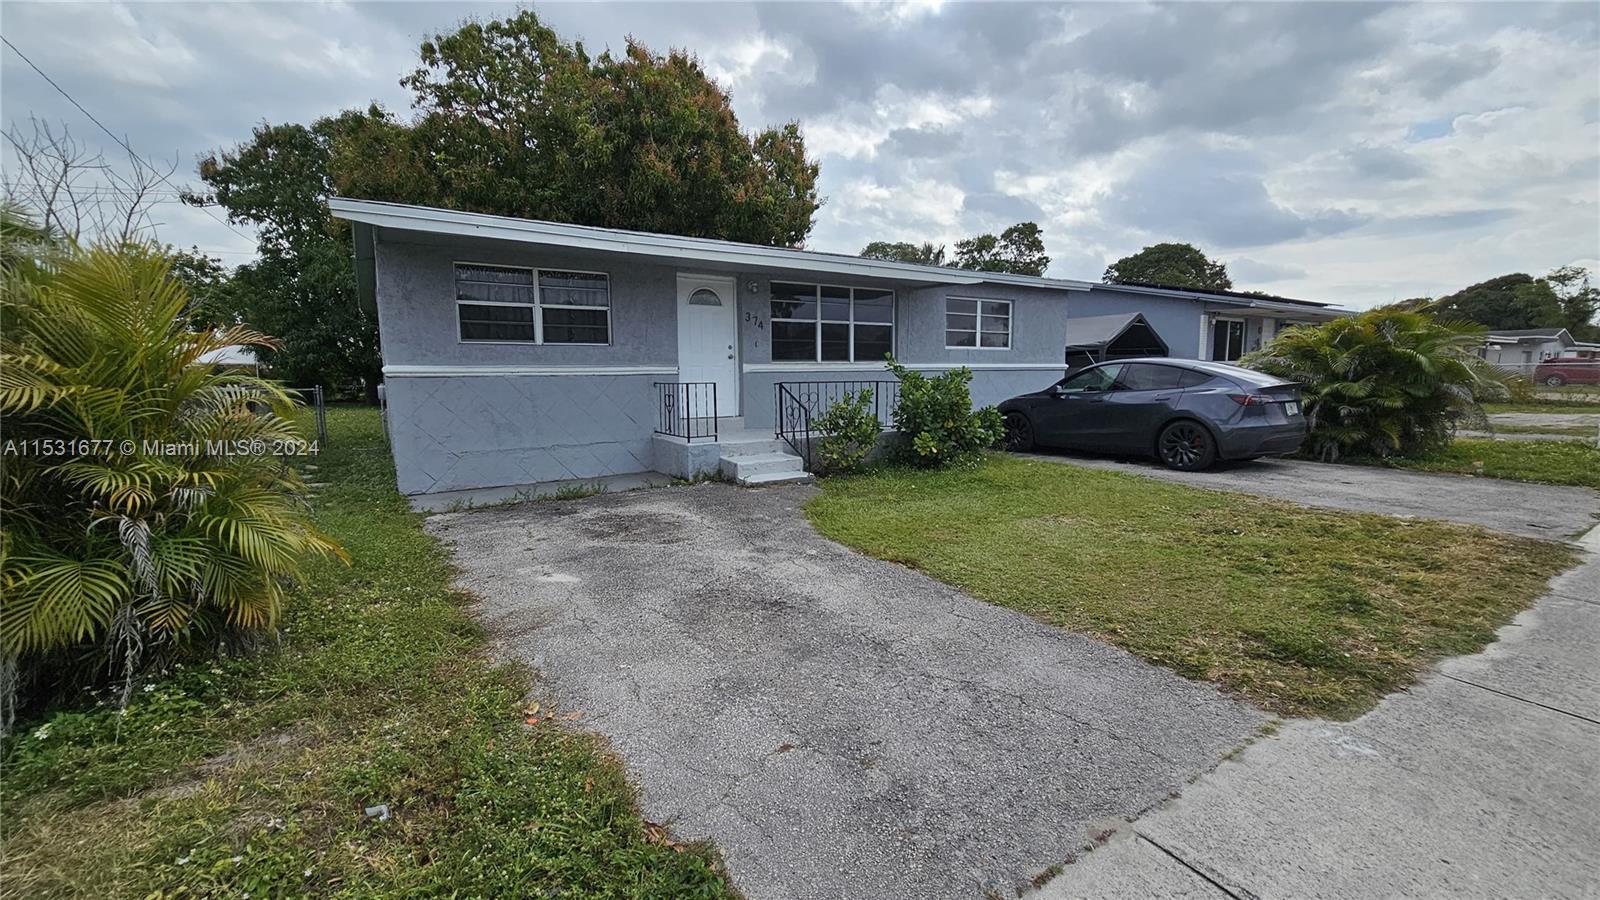 Photo of 374 NW 31st Ave in Fort Lauderdale, FL